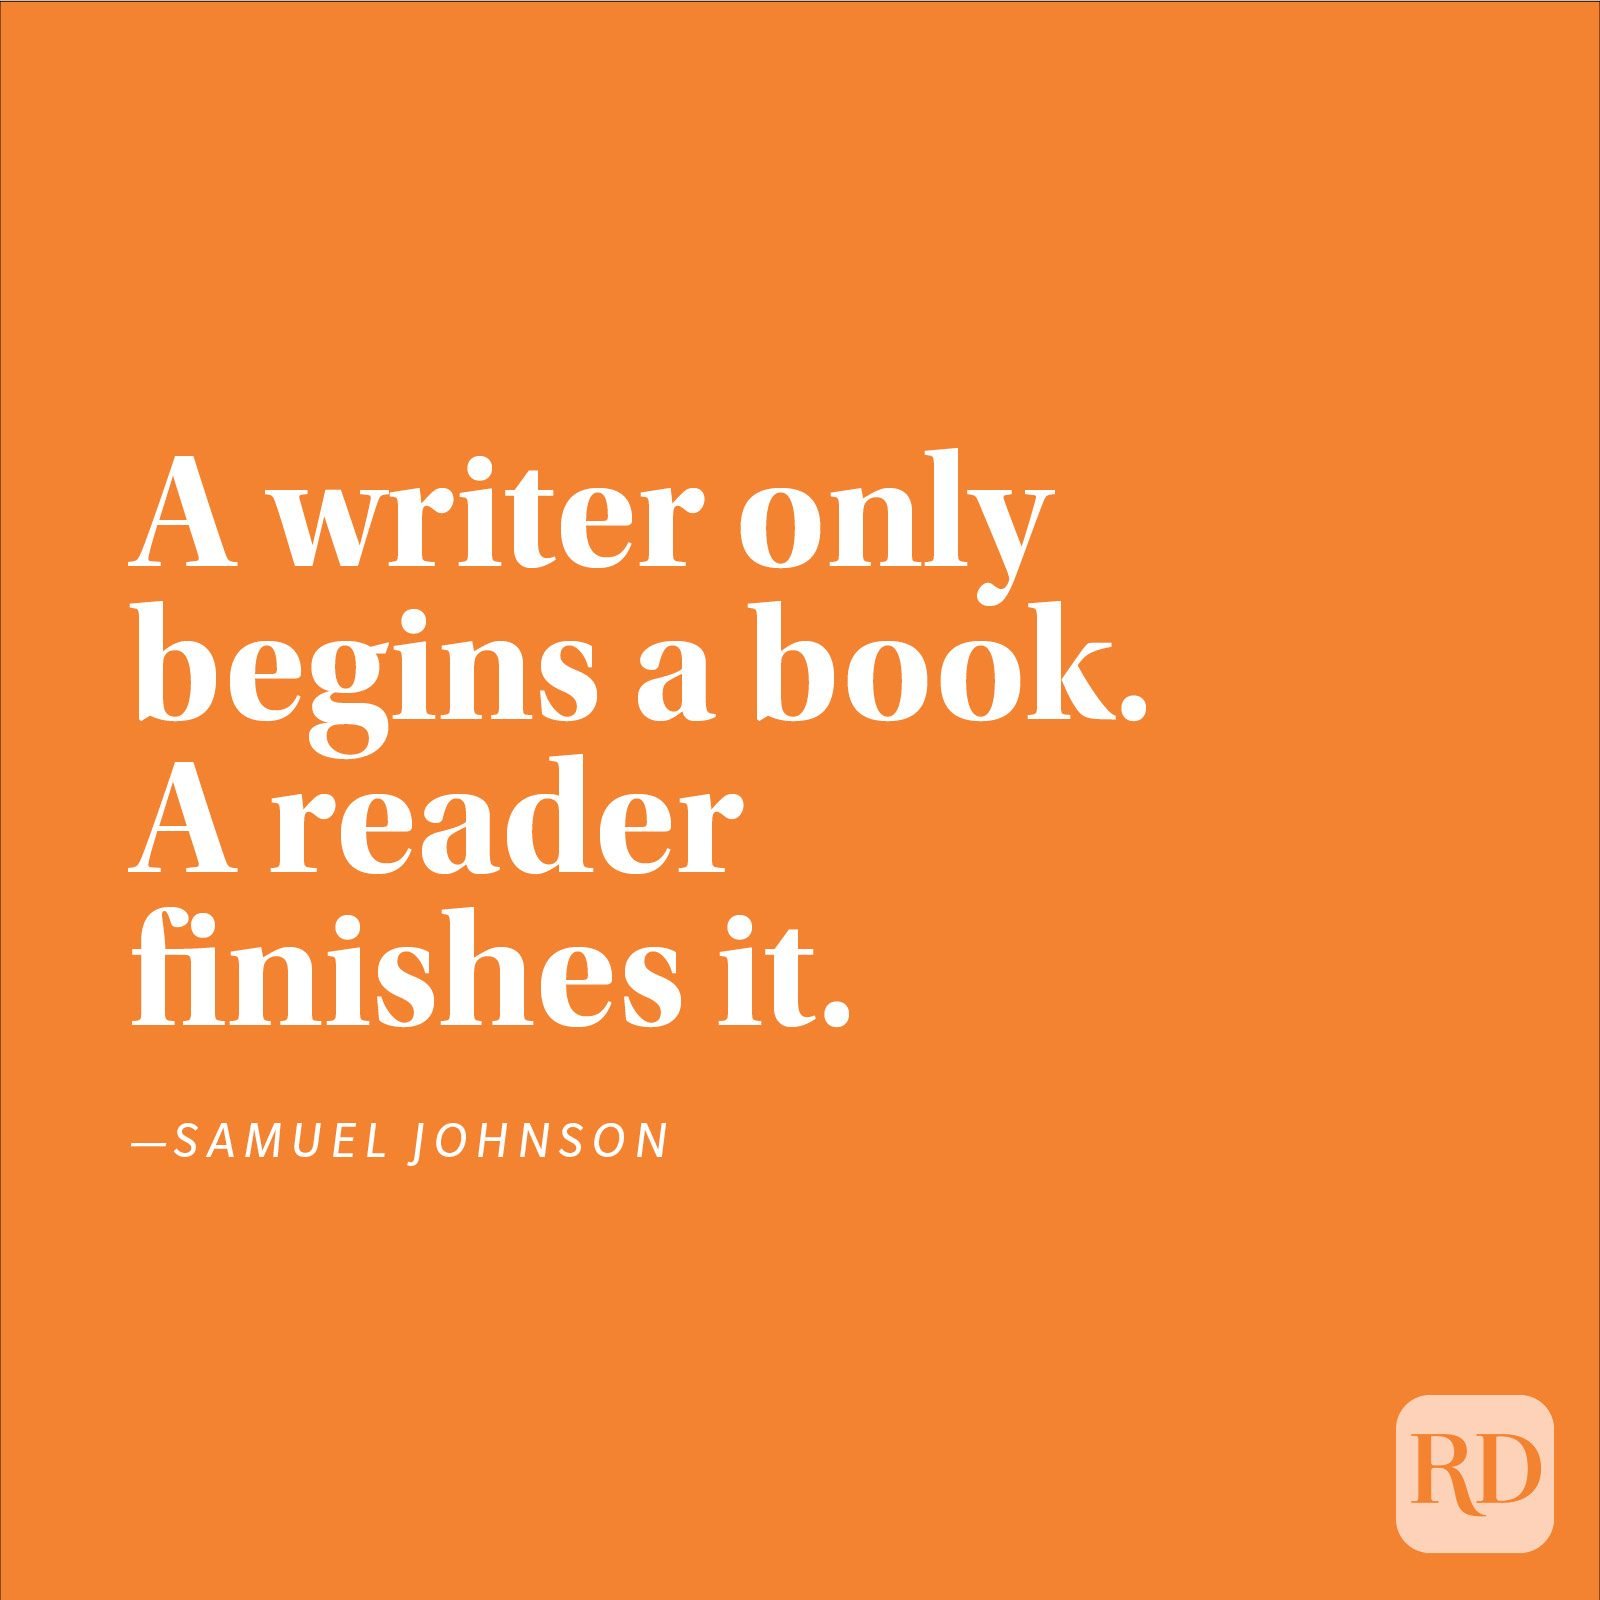 40 of the Best Reading Quotes | Reader's Digest